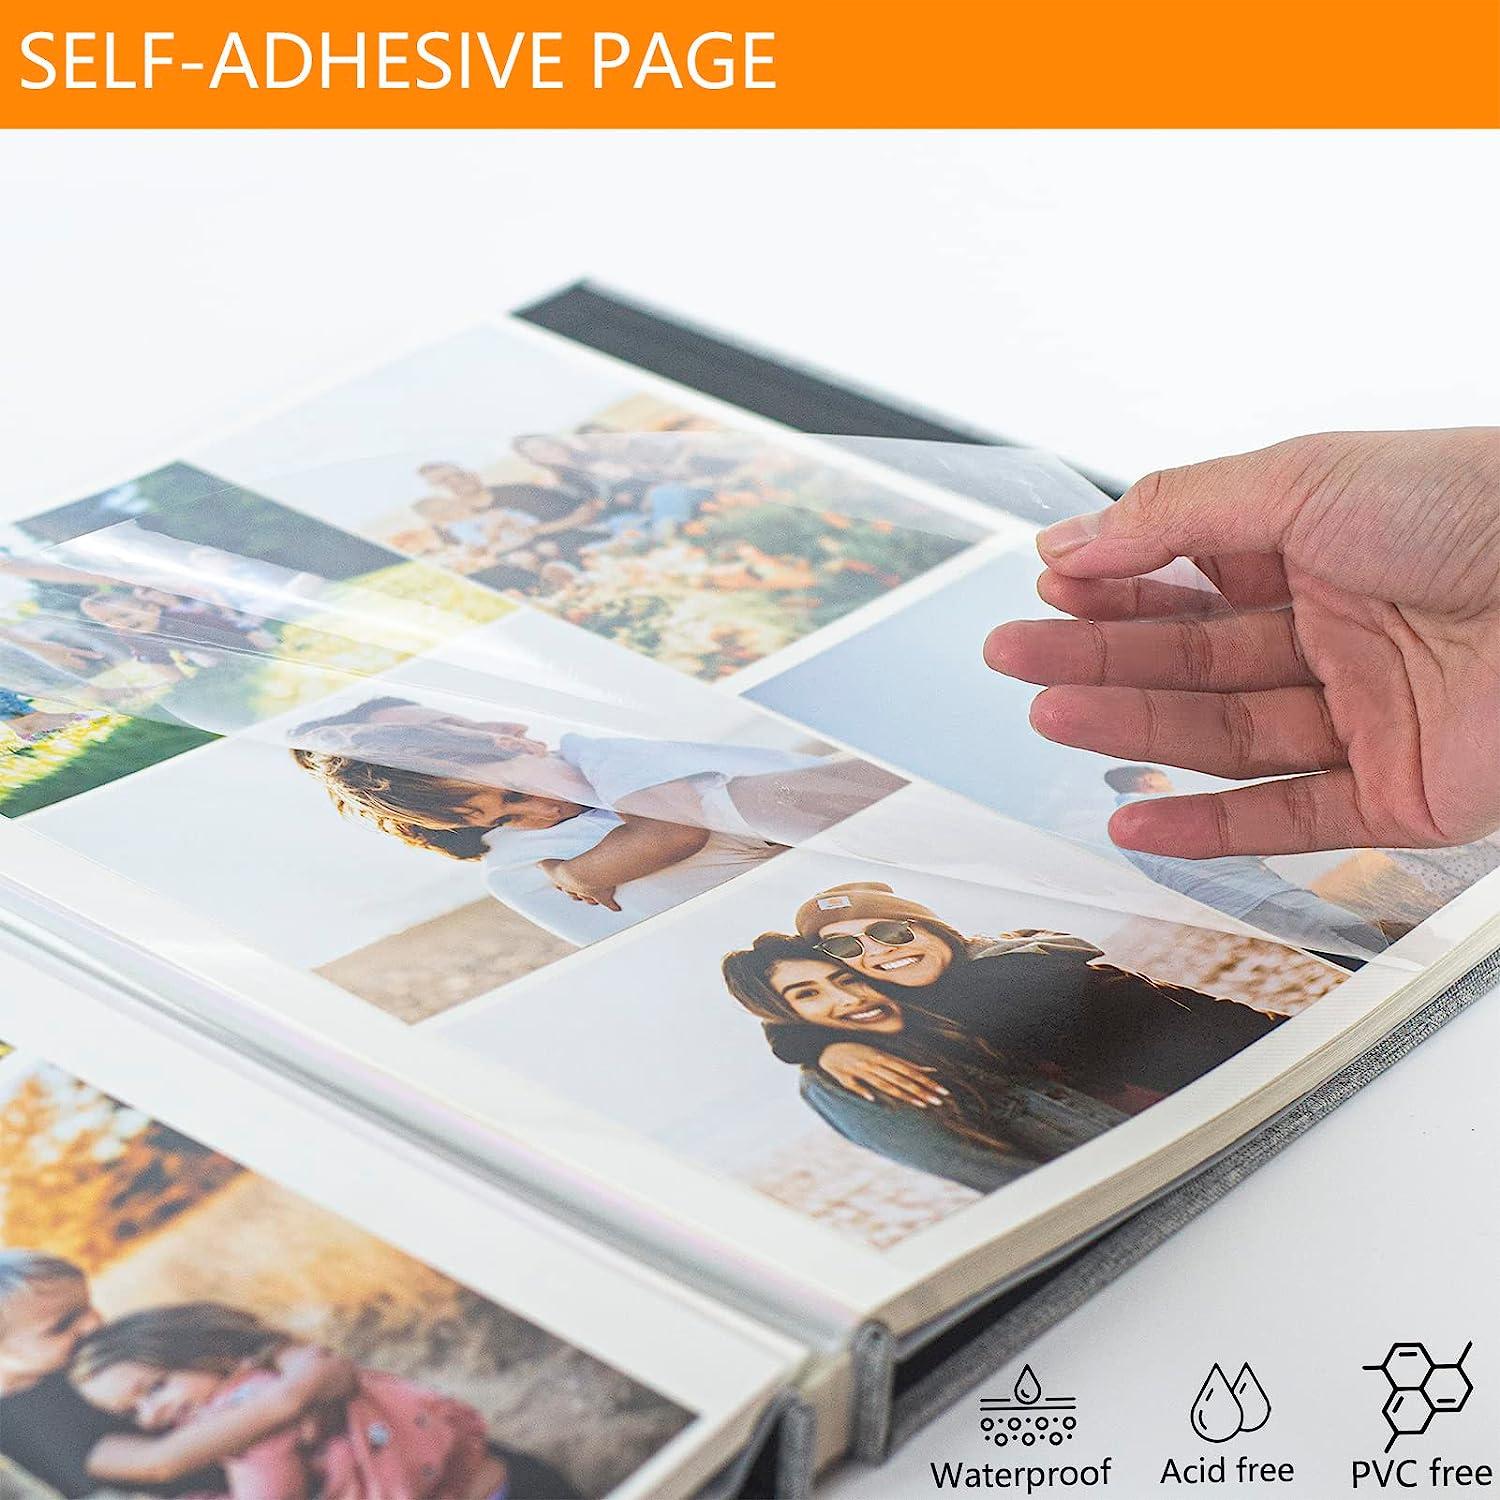 Photo Album Self Adhesive Pages Scrapbook Magnetic Photo Albums